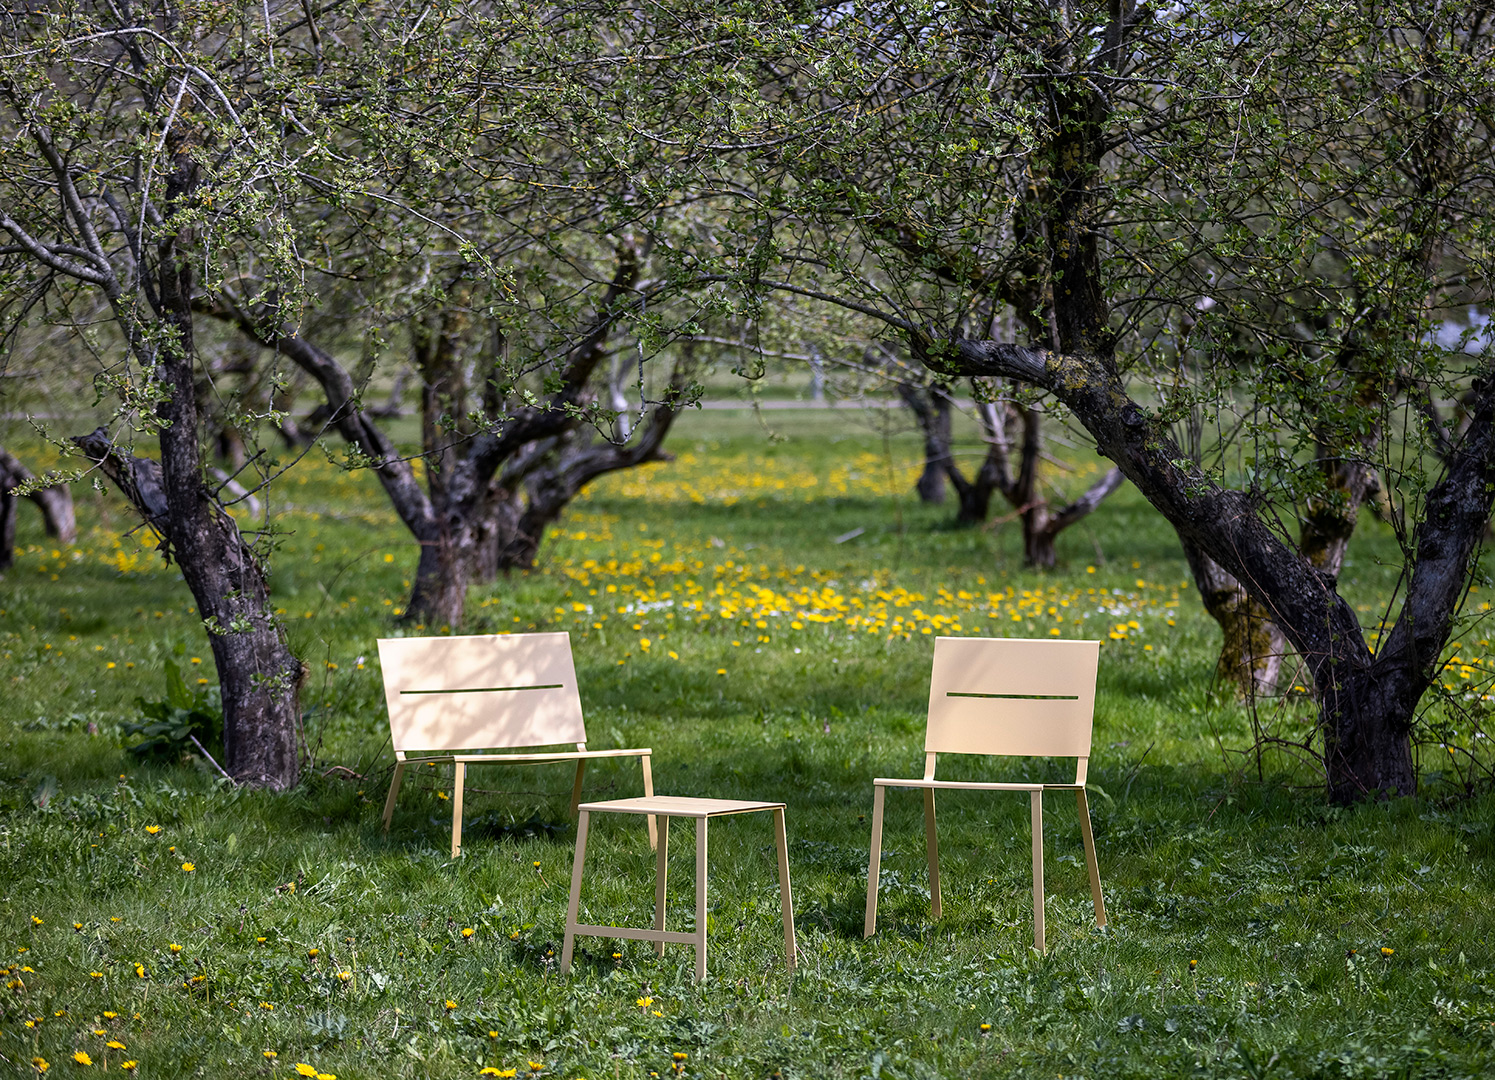 A low lounge chair, a metal chair and metal stool are seen under flowering apple trees